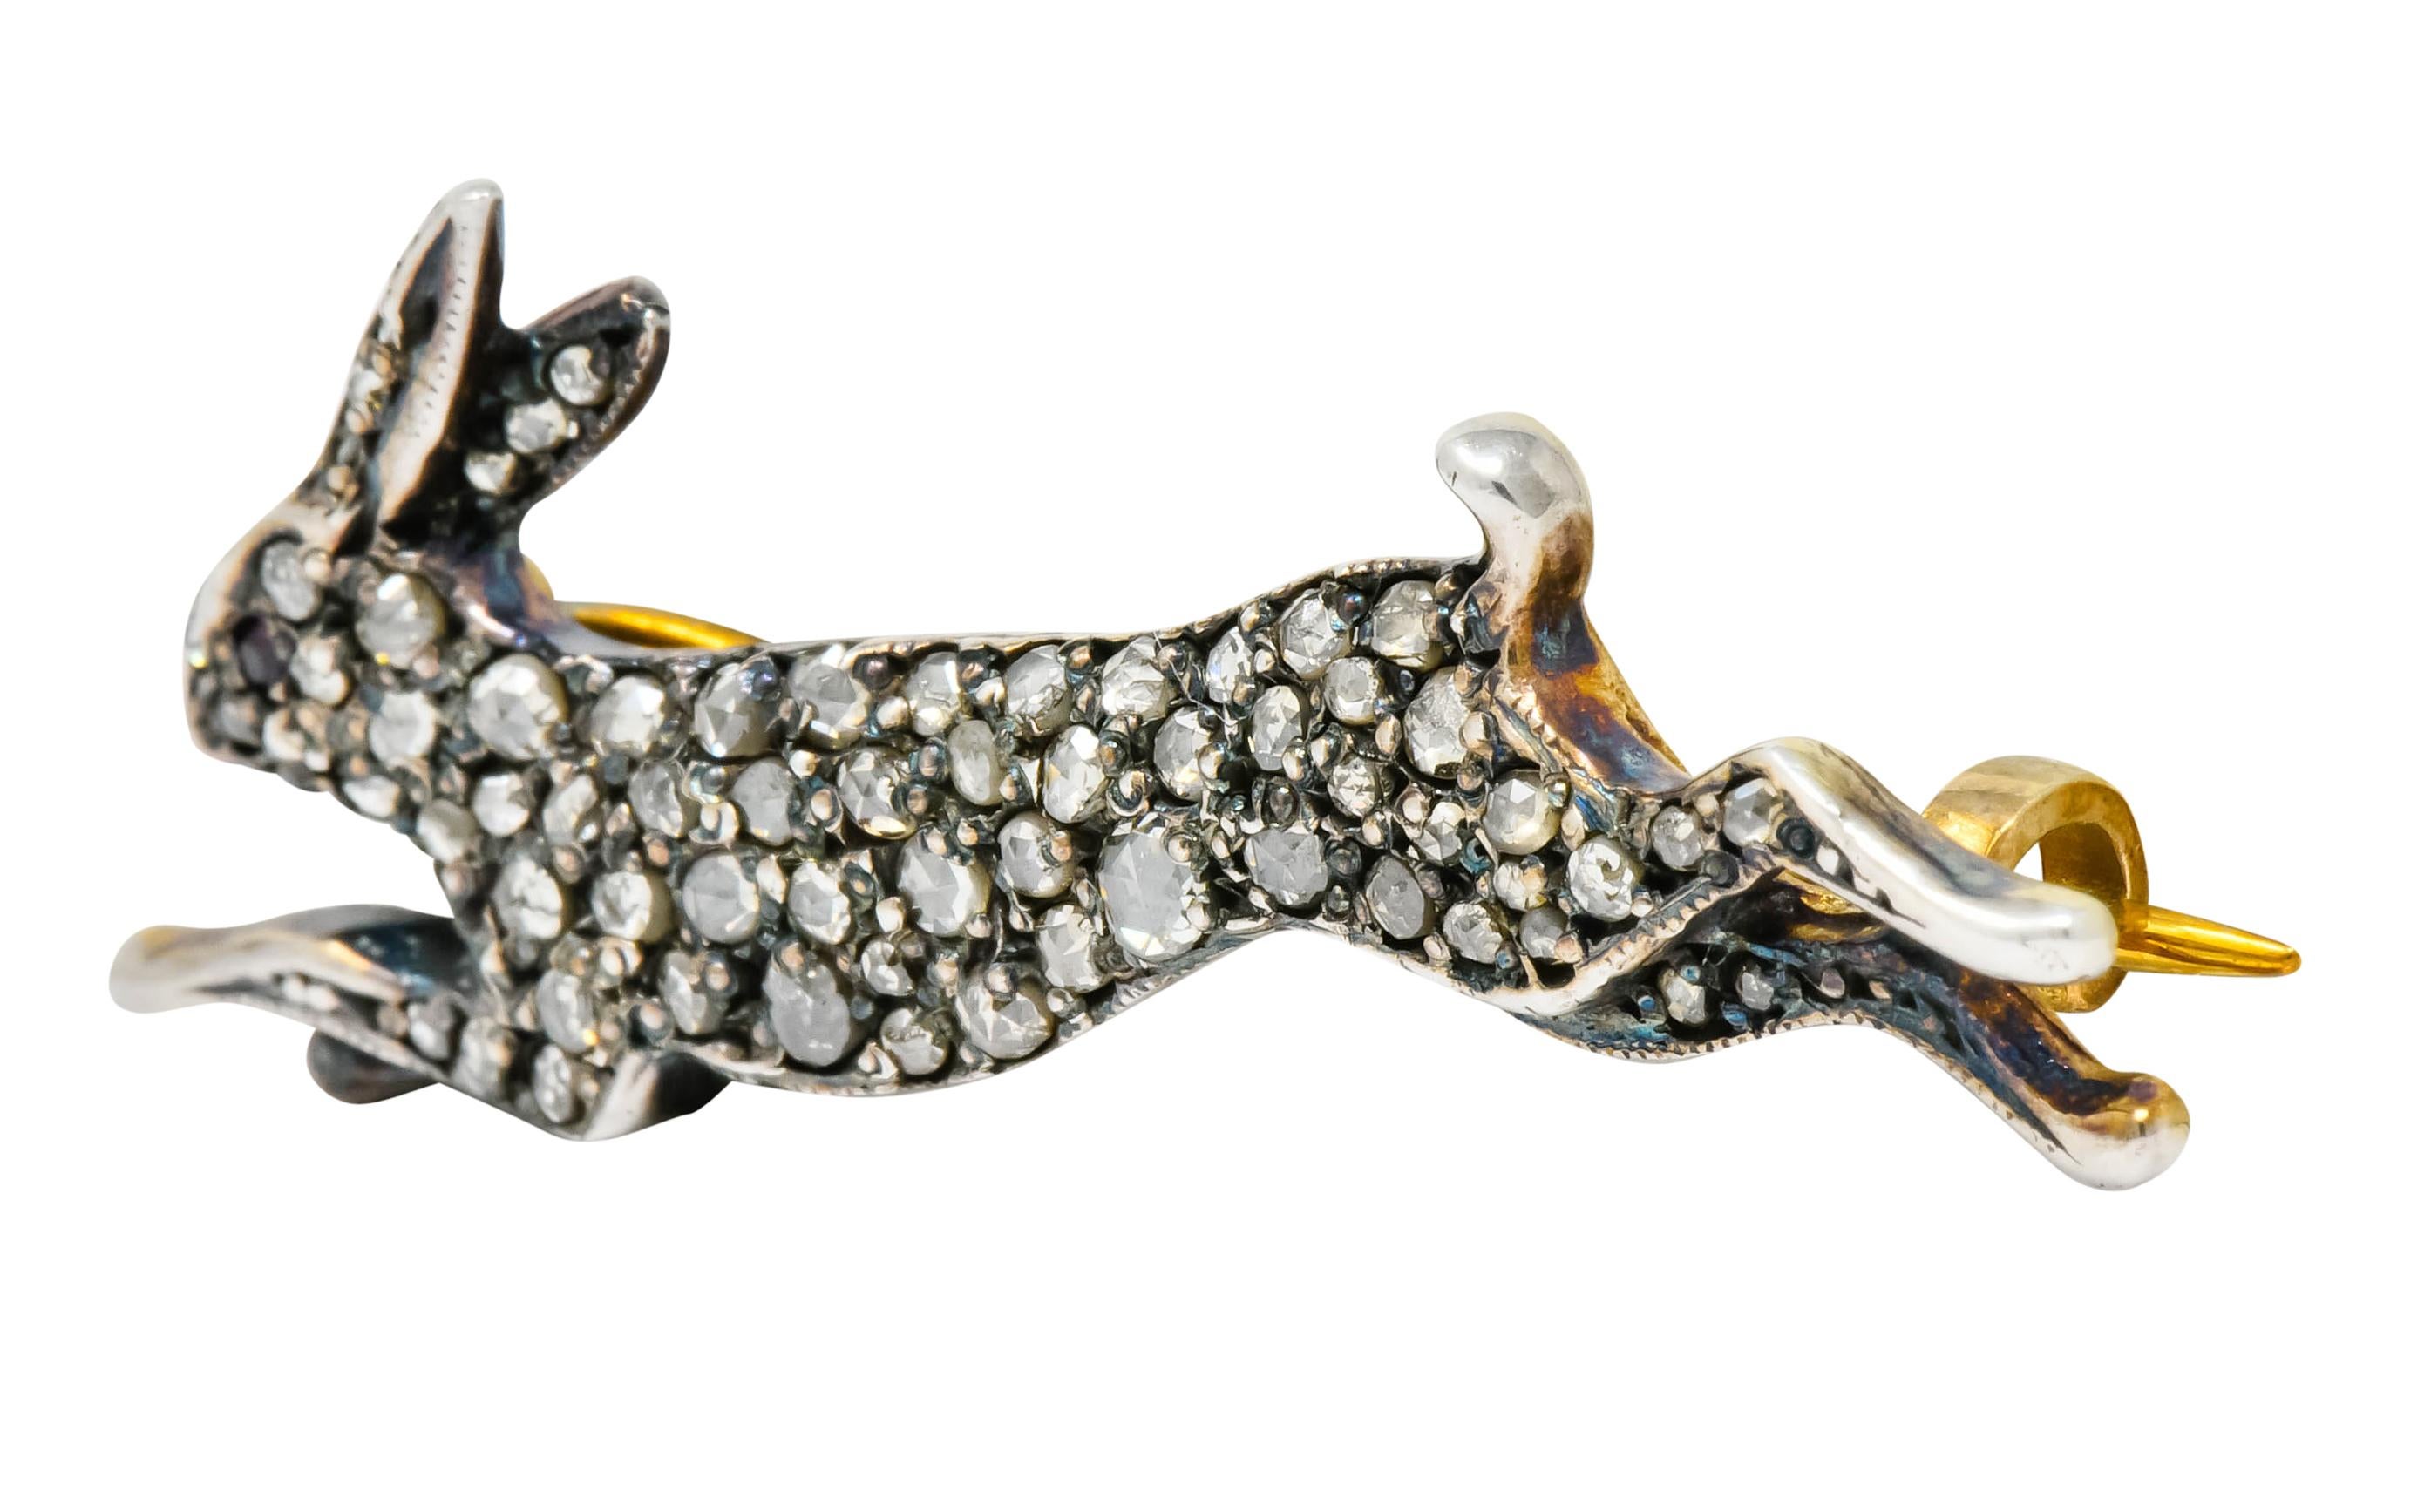 Brooch designed as a silver topped hare, mid leap, bead set throughout by rose cut diamonds

Accented by round cut ruby eye and some milgrain detail

Completed by pin stem and closure

Tested as silver-topped 10 karat gold

Measures: 5/8 x 1 5/8